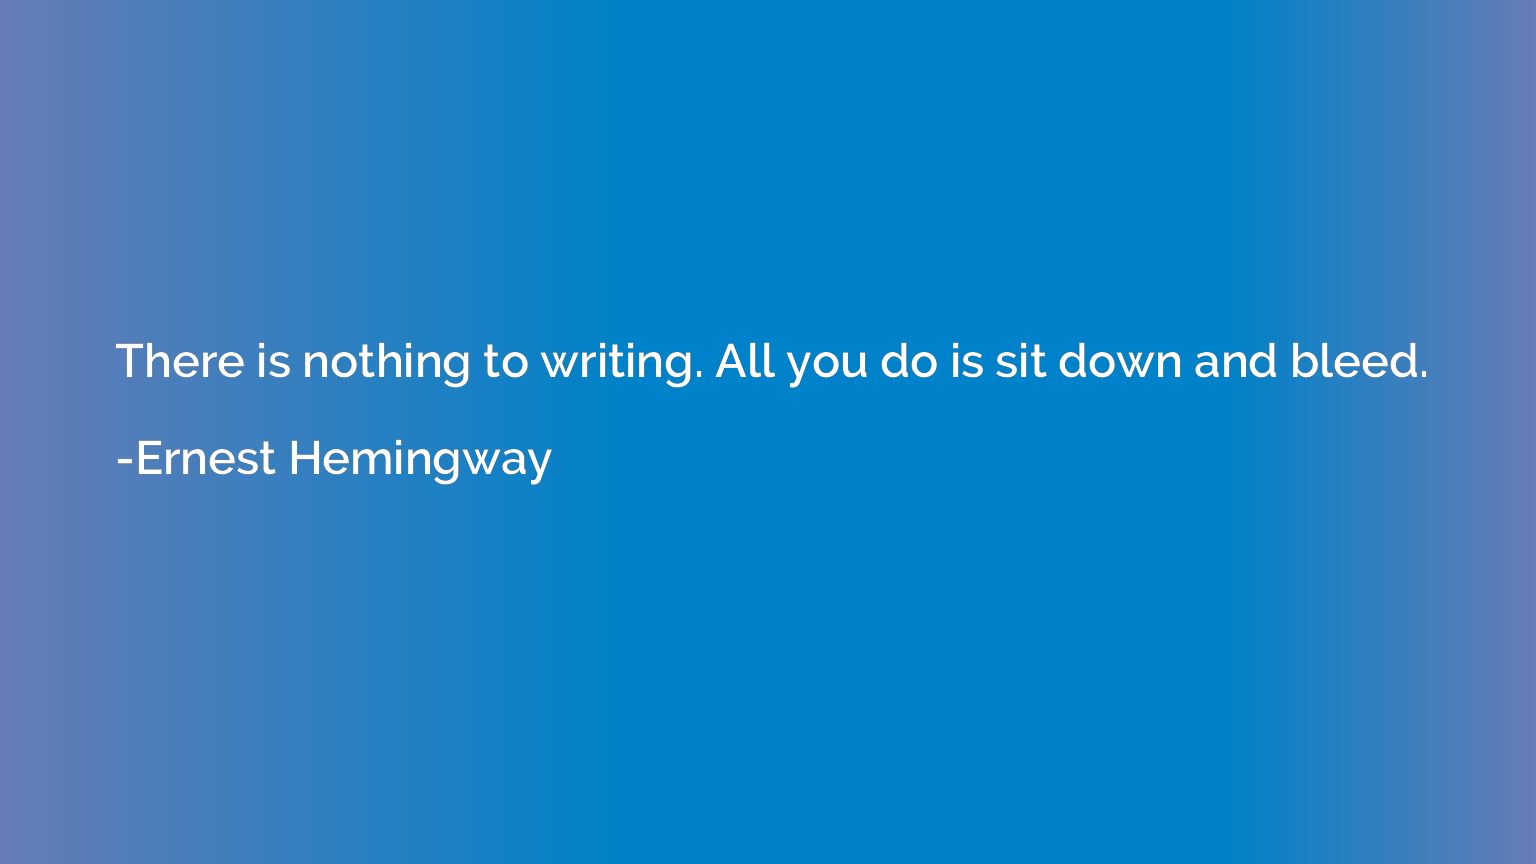 There is nothing to writing. All you do is sit down and blee